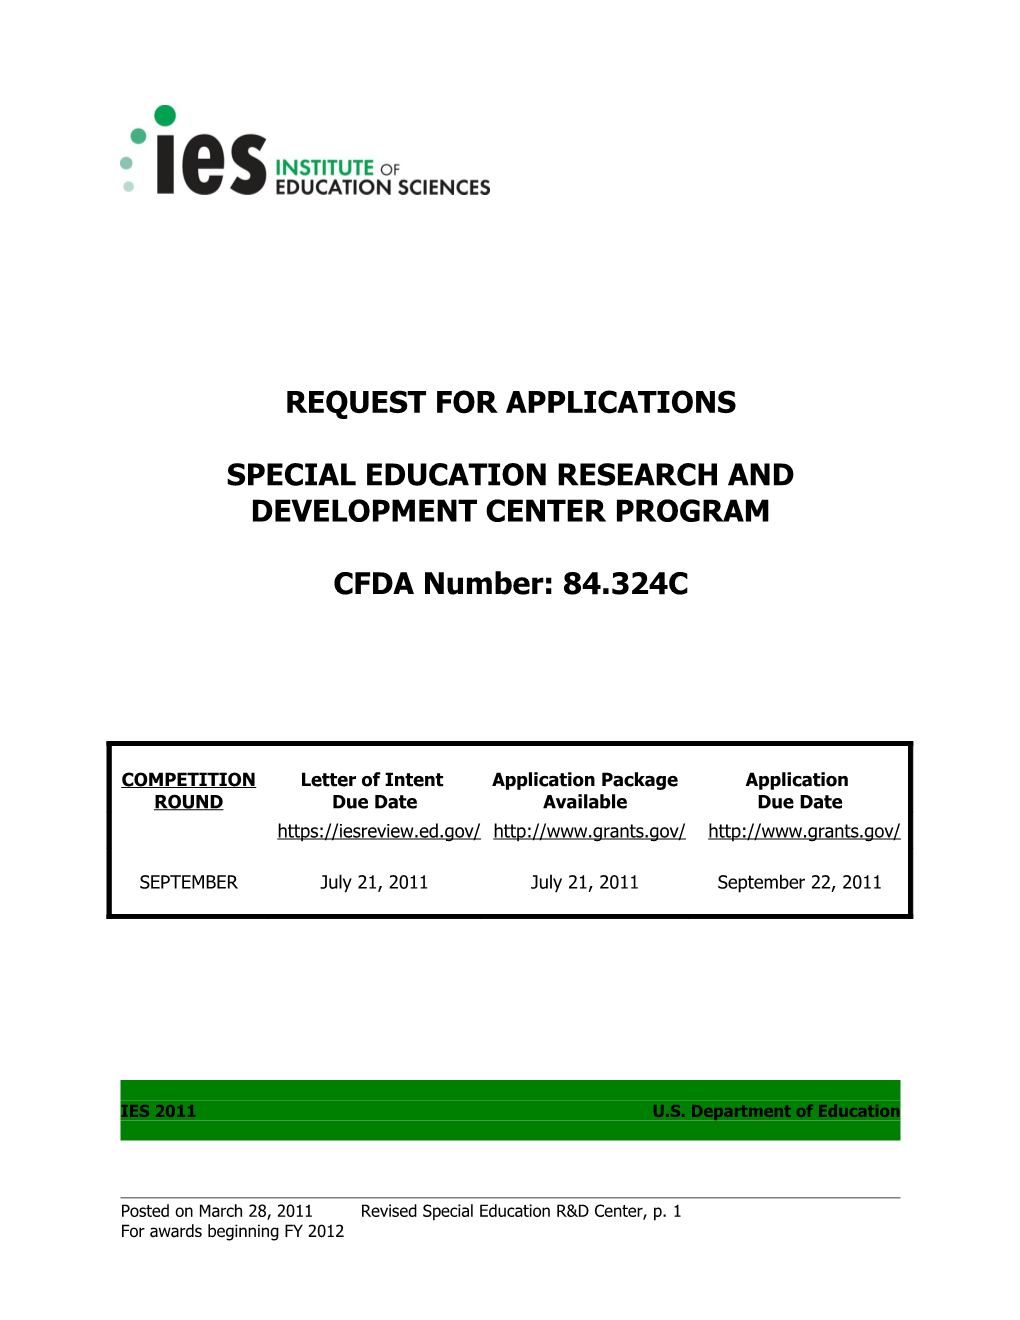 Special Education Research and Development Center Program